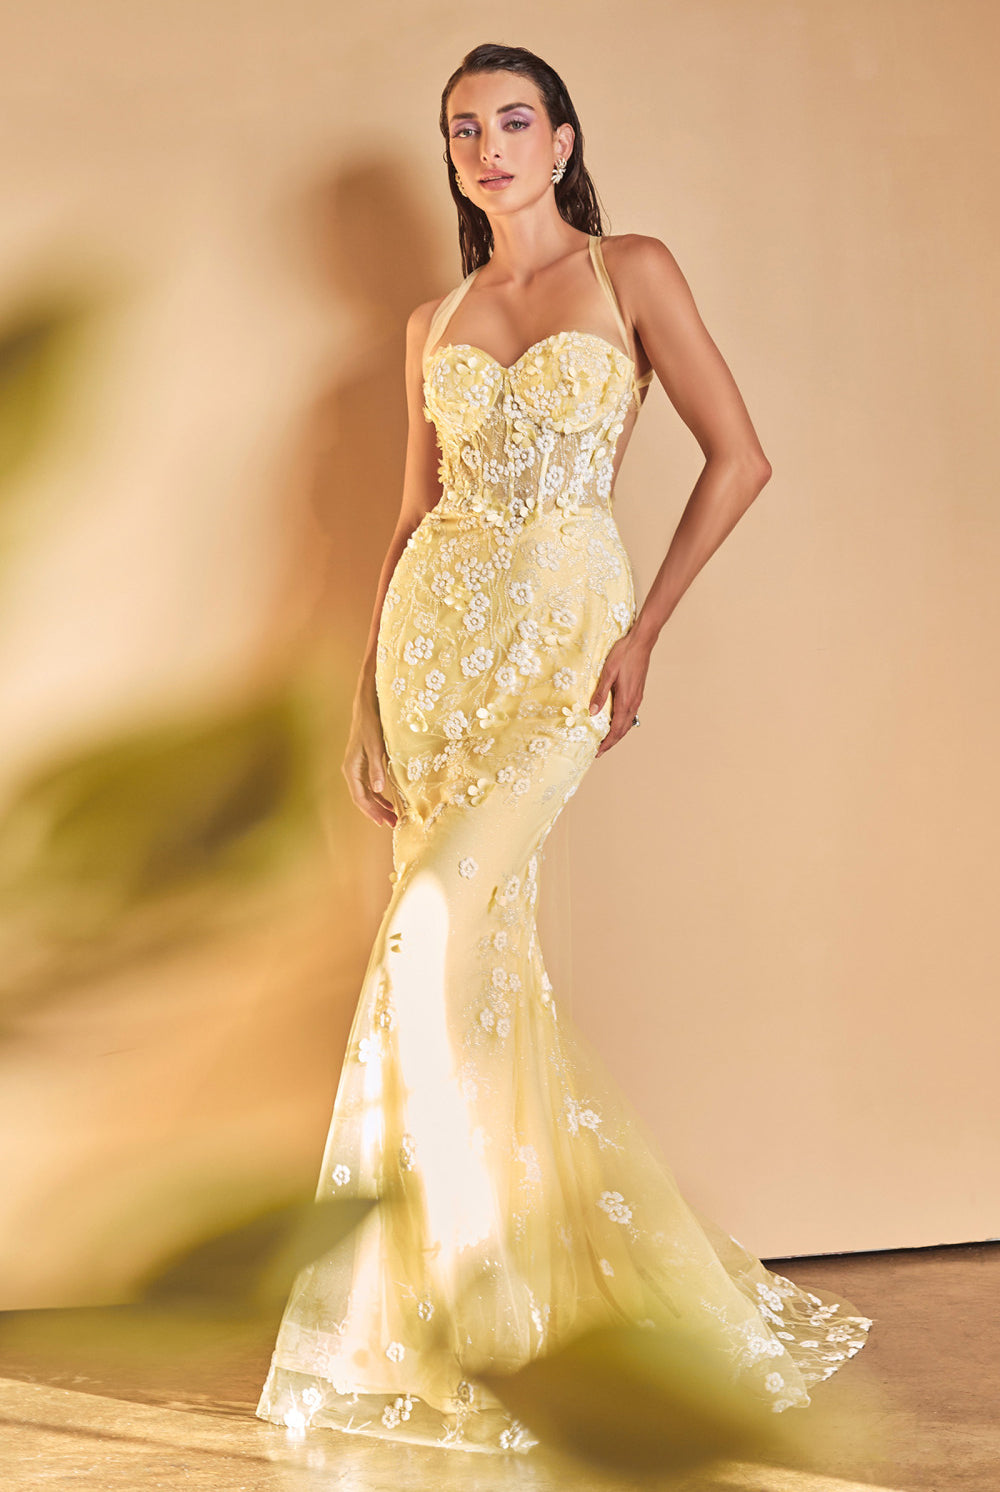 Embellished Daisy Prom Gown with Sweetheart Backless Bodice-smcdress